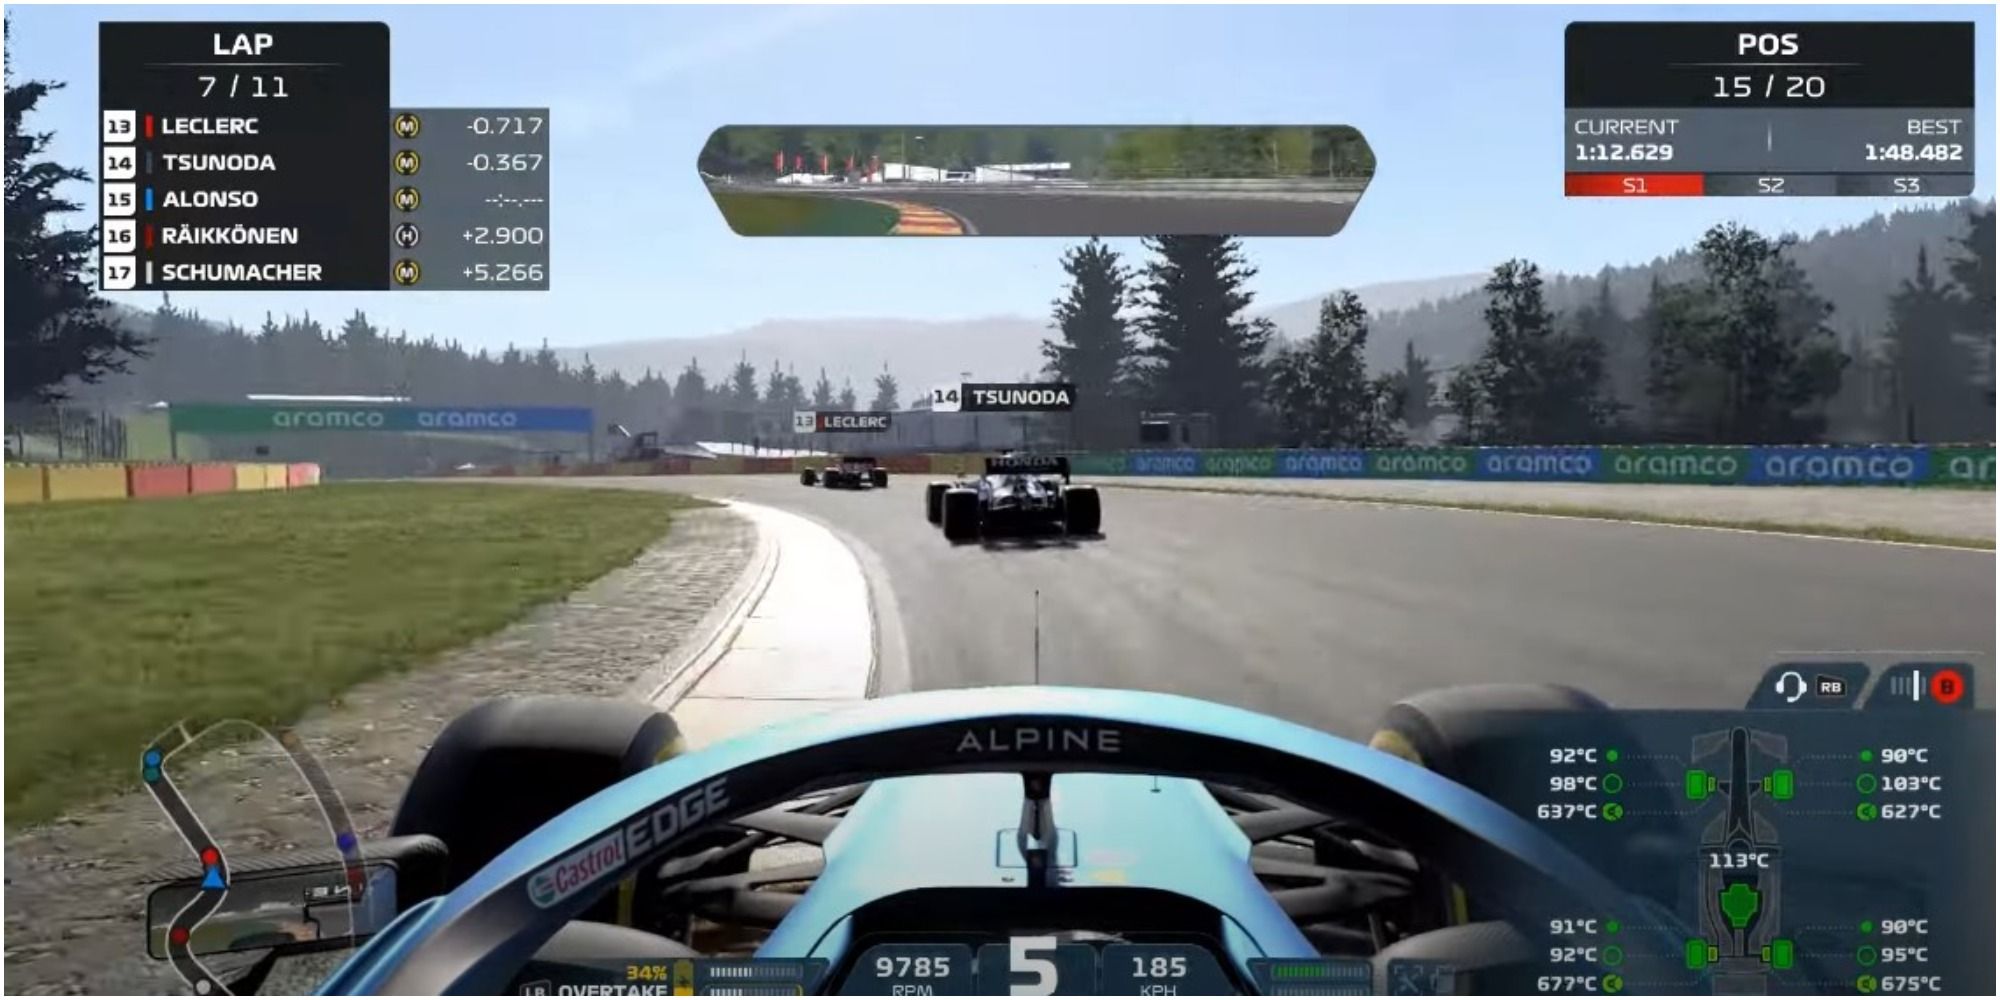 F1 2021 Catching Up With Two Other Cars In The Final Stretch